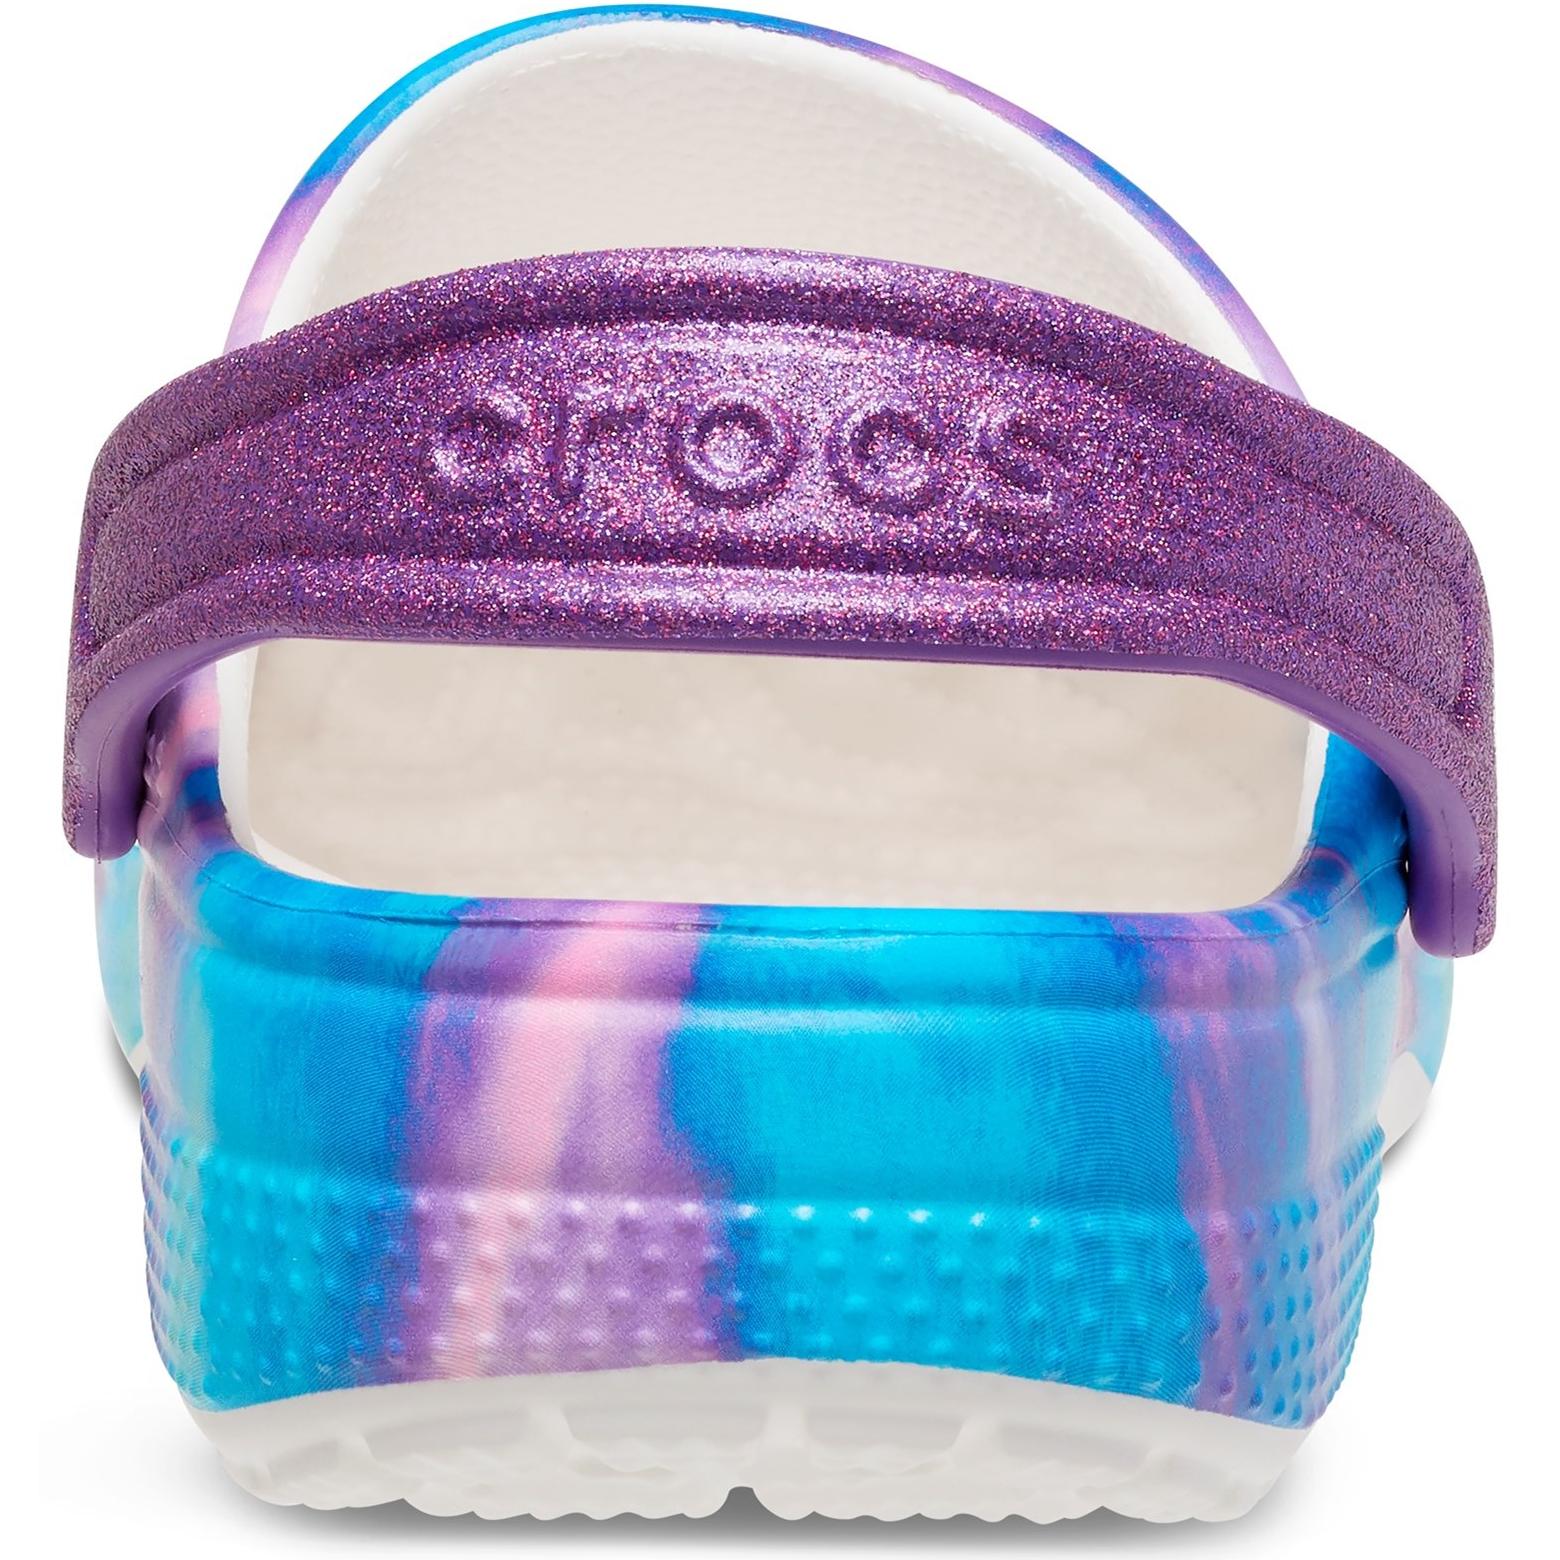 Crocs Classic Out Of This World II Clog Shoes